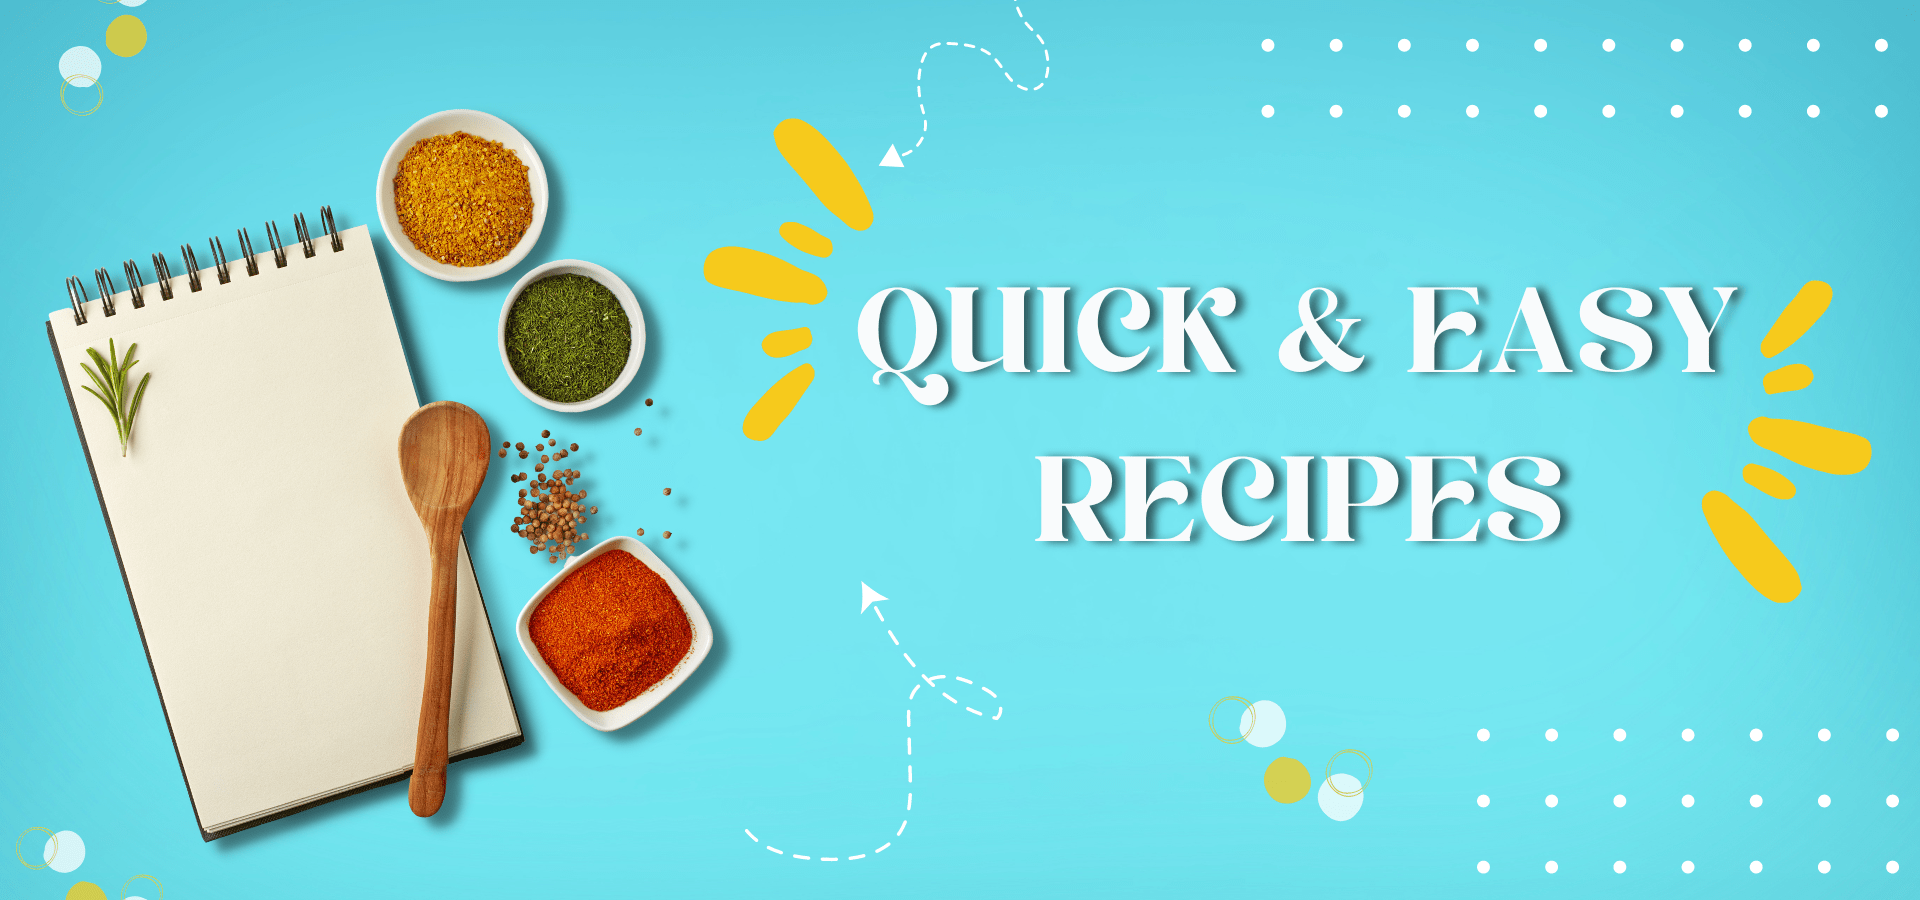 quick easy snack recipes for everyday meal